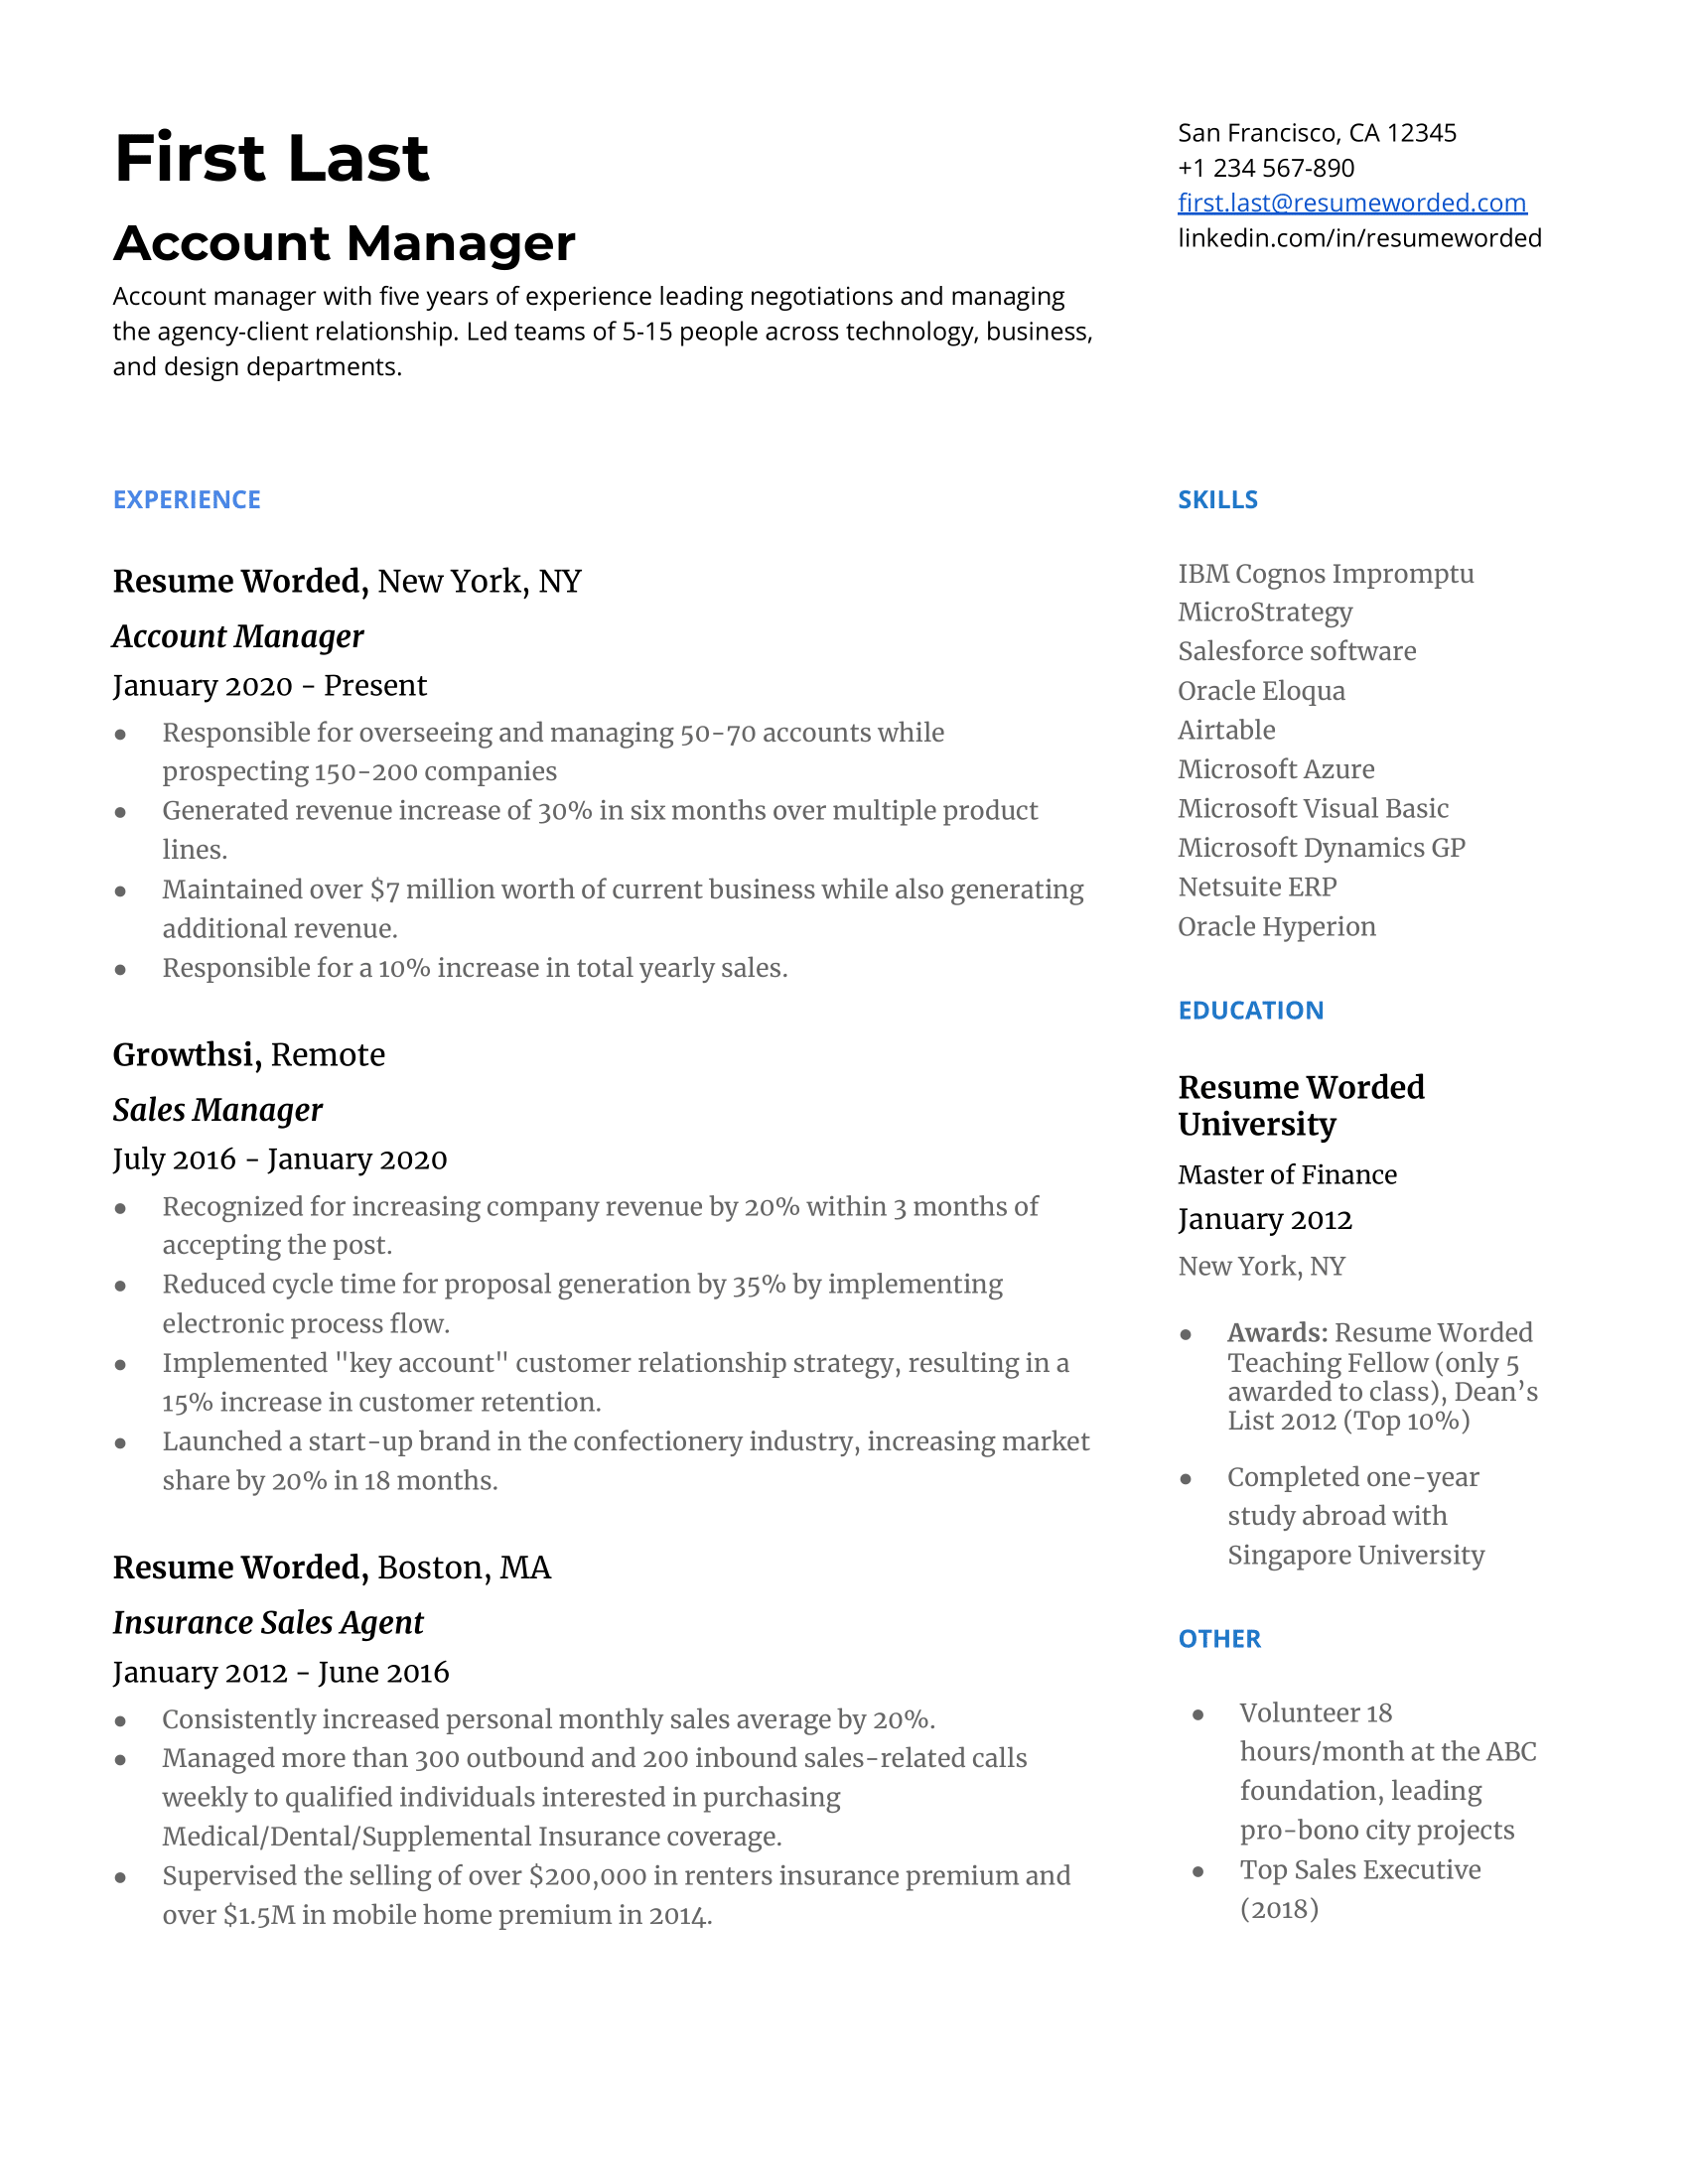 A well-written CV focusing on relationship-building and data proficiency for an Account Manager role.